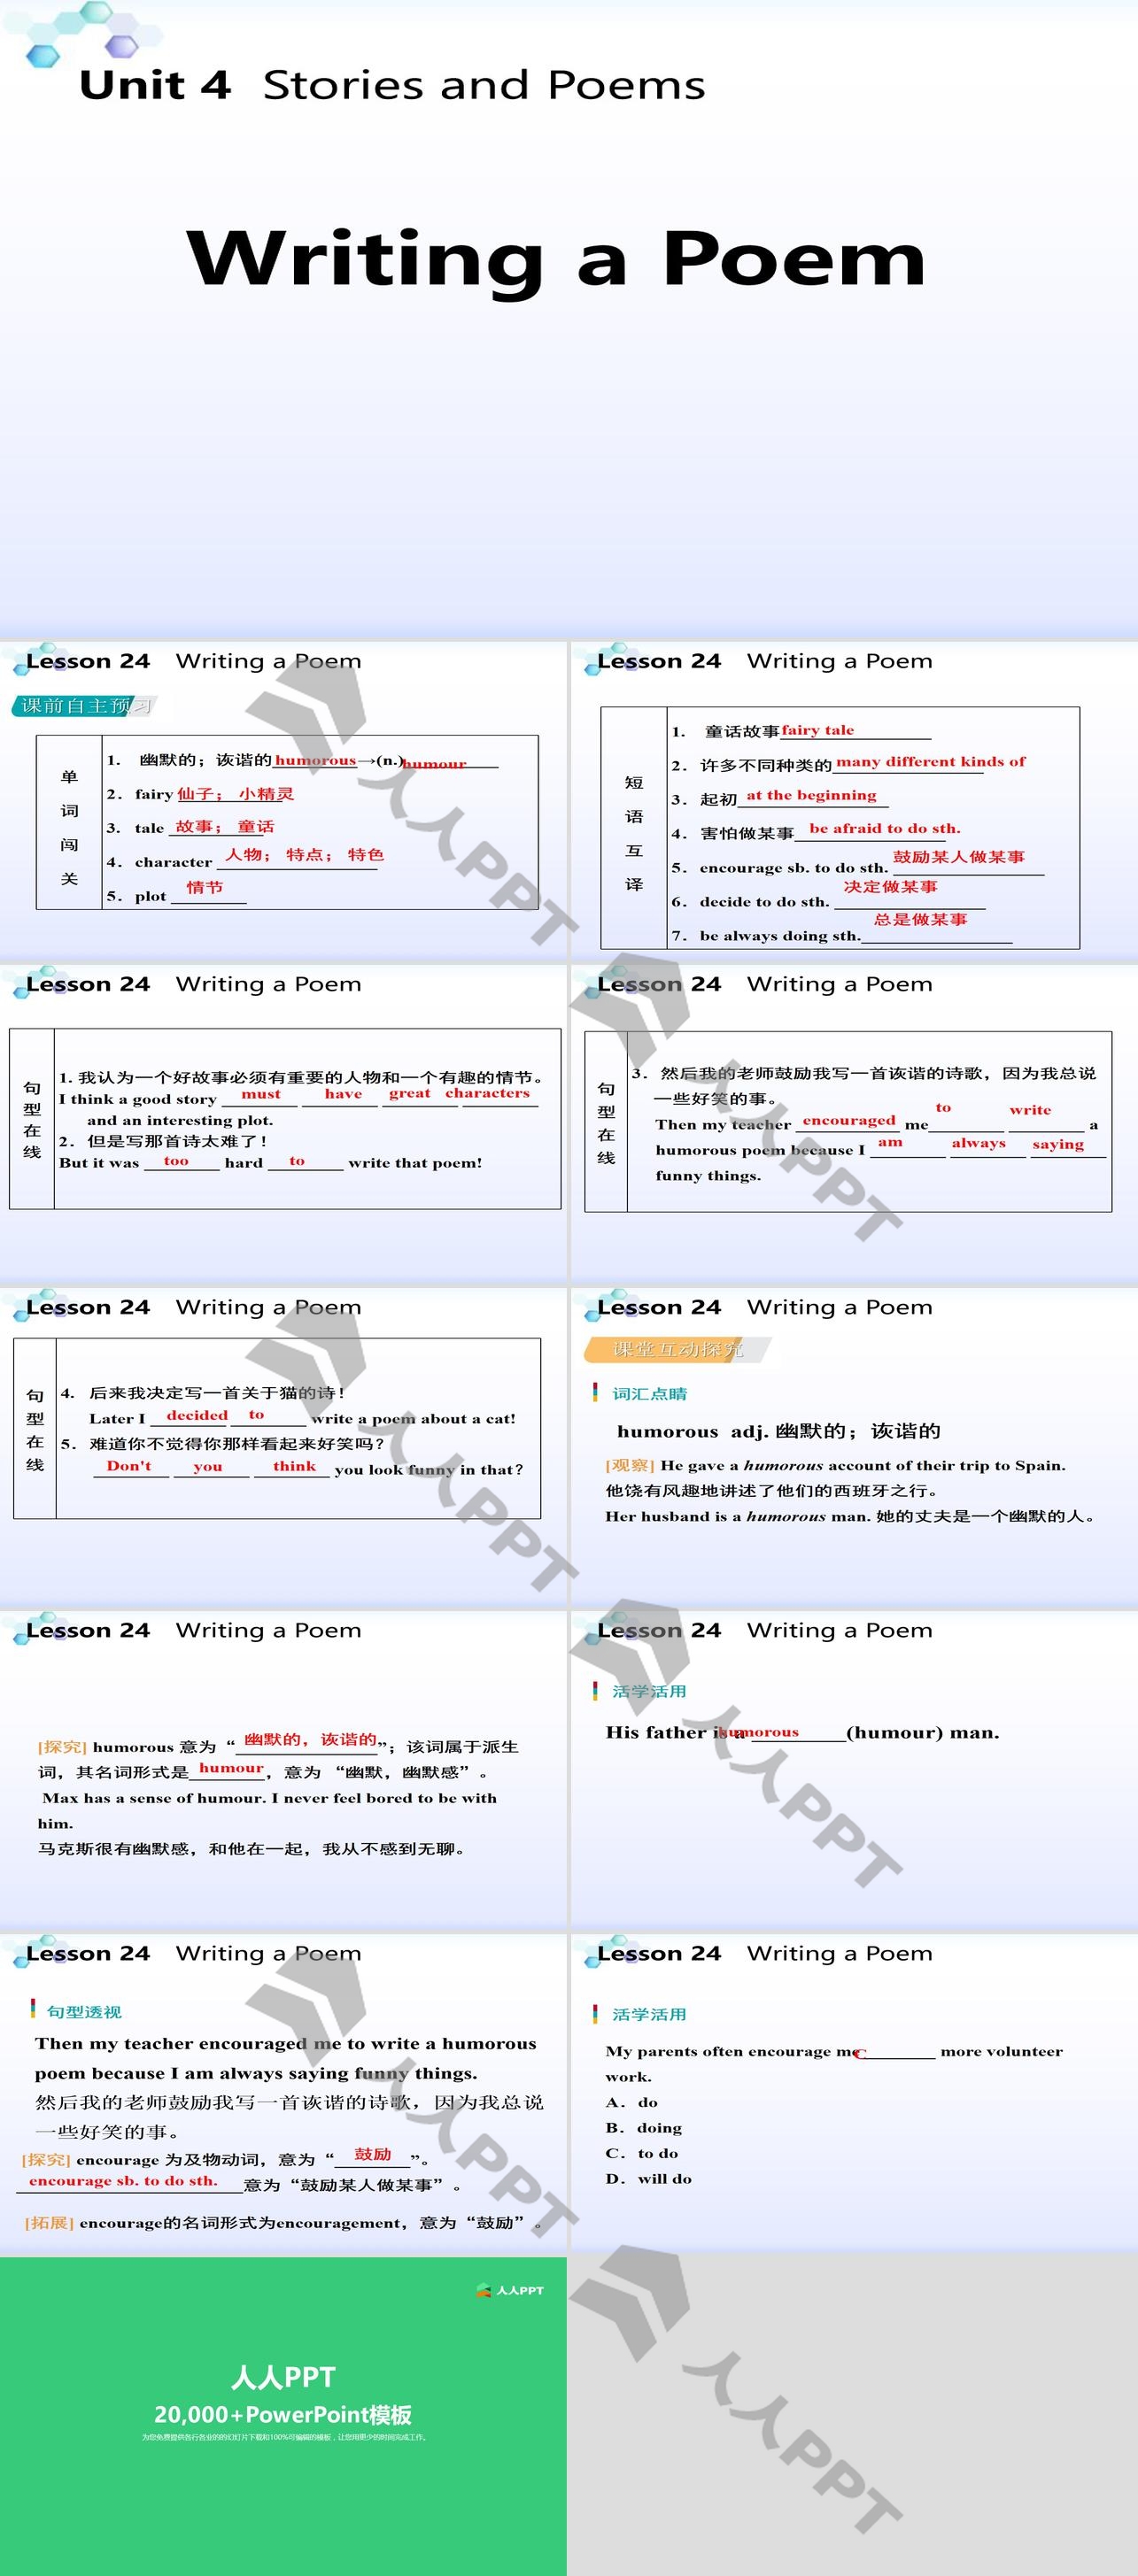 《Writing a Poem》Stories and Poems PPT教学课件长图